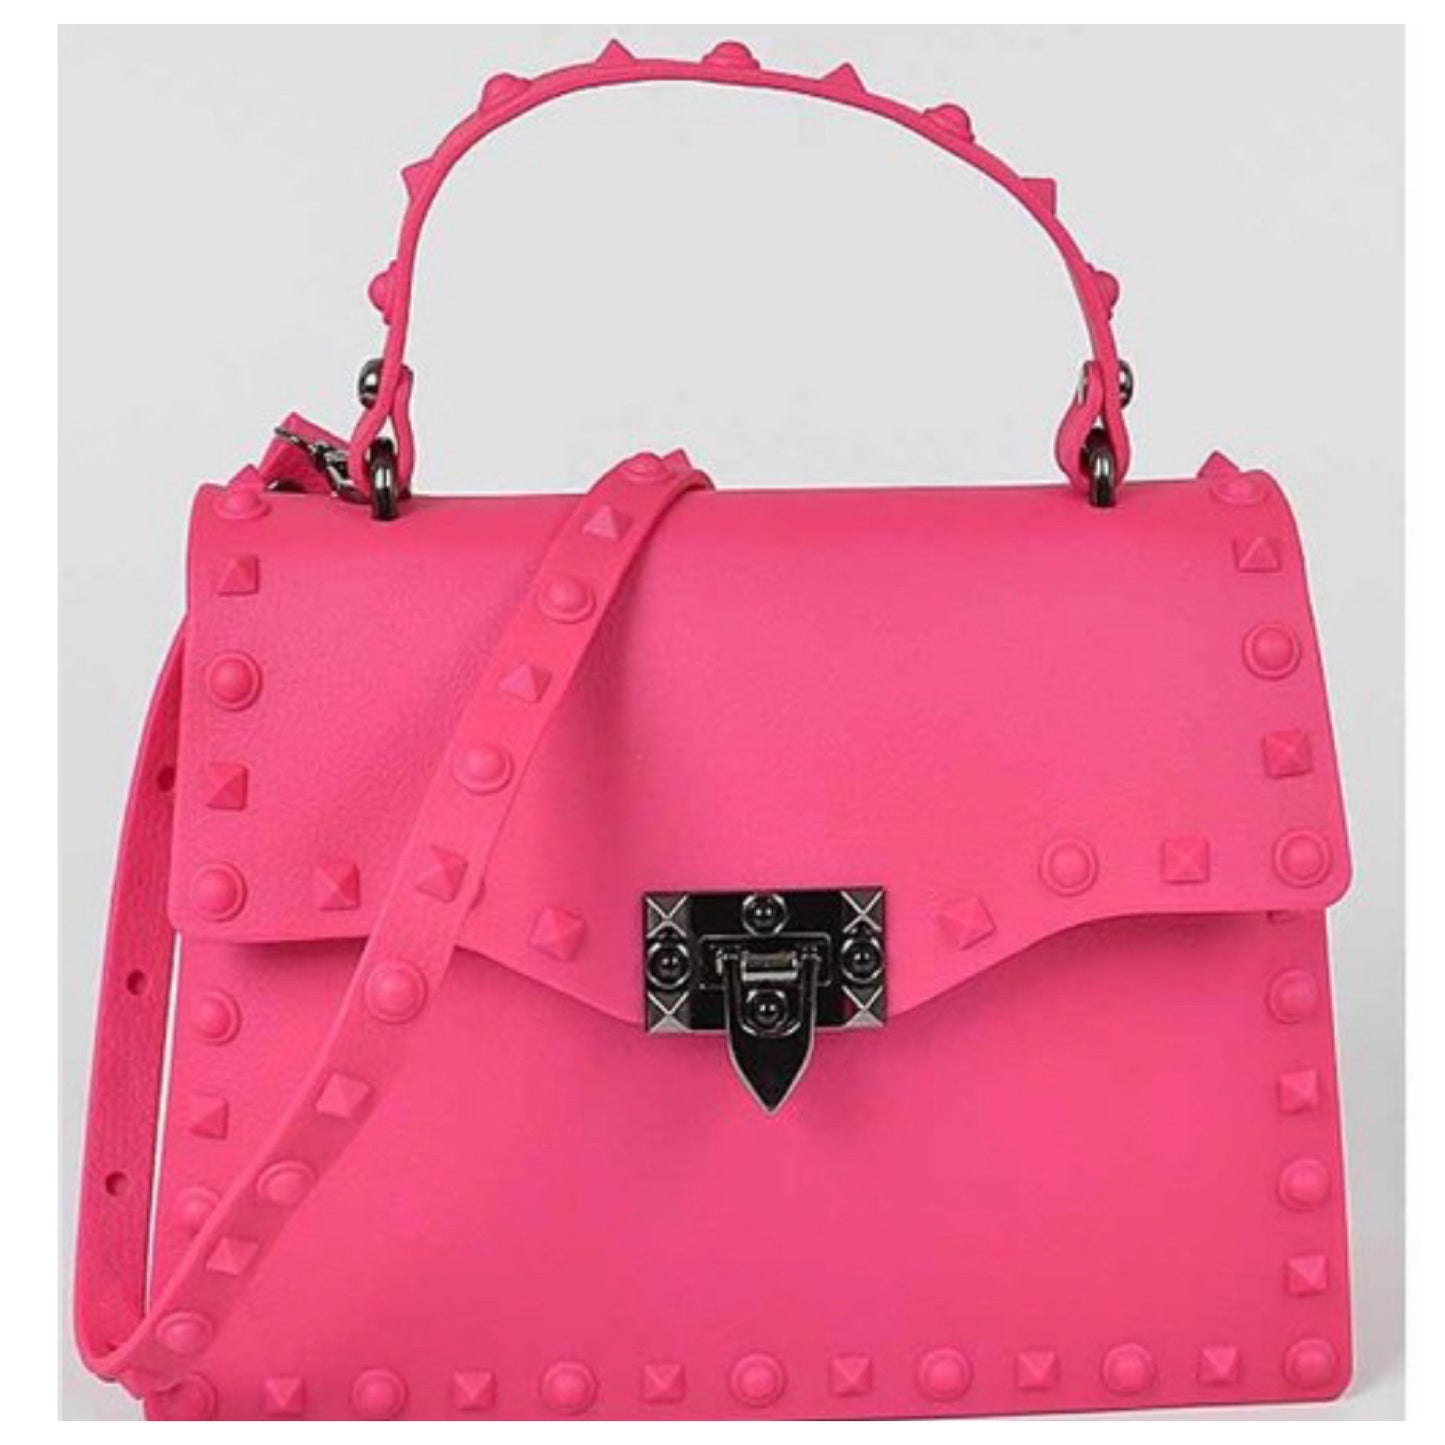 Studs Around Clutch Handle Purse ( More Colors)